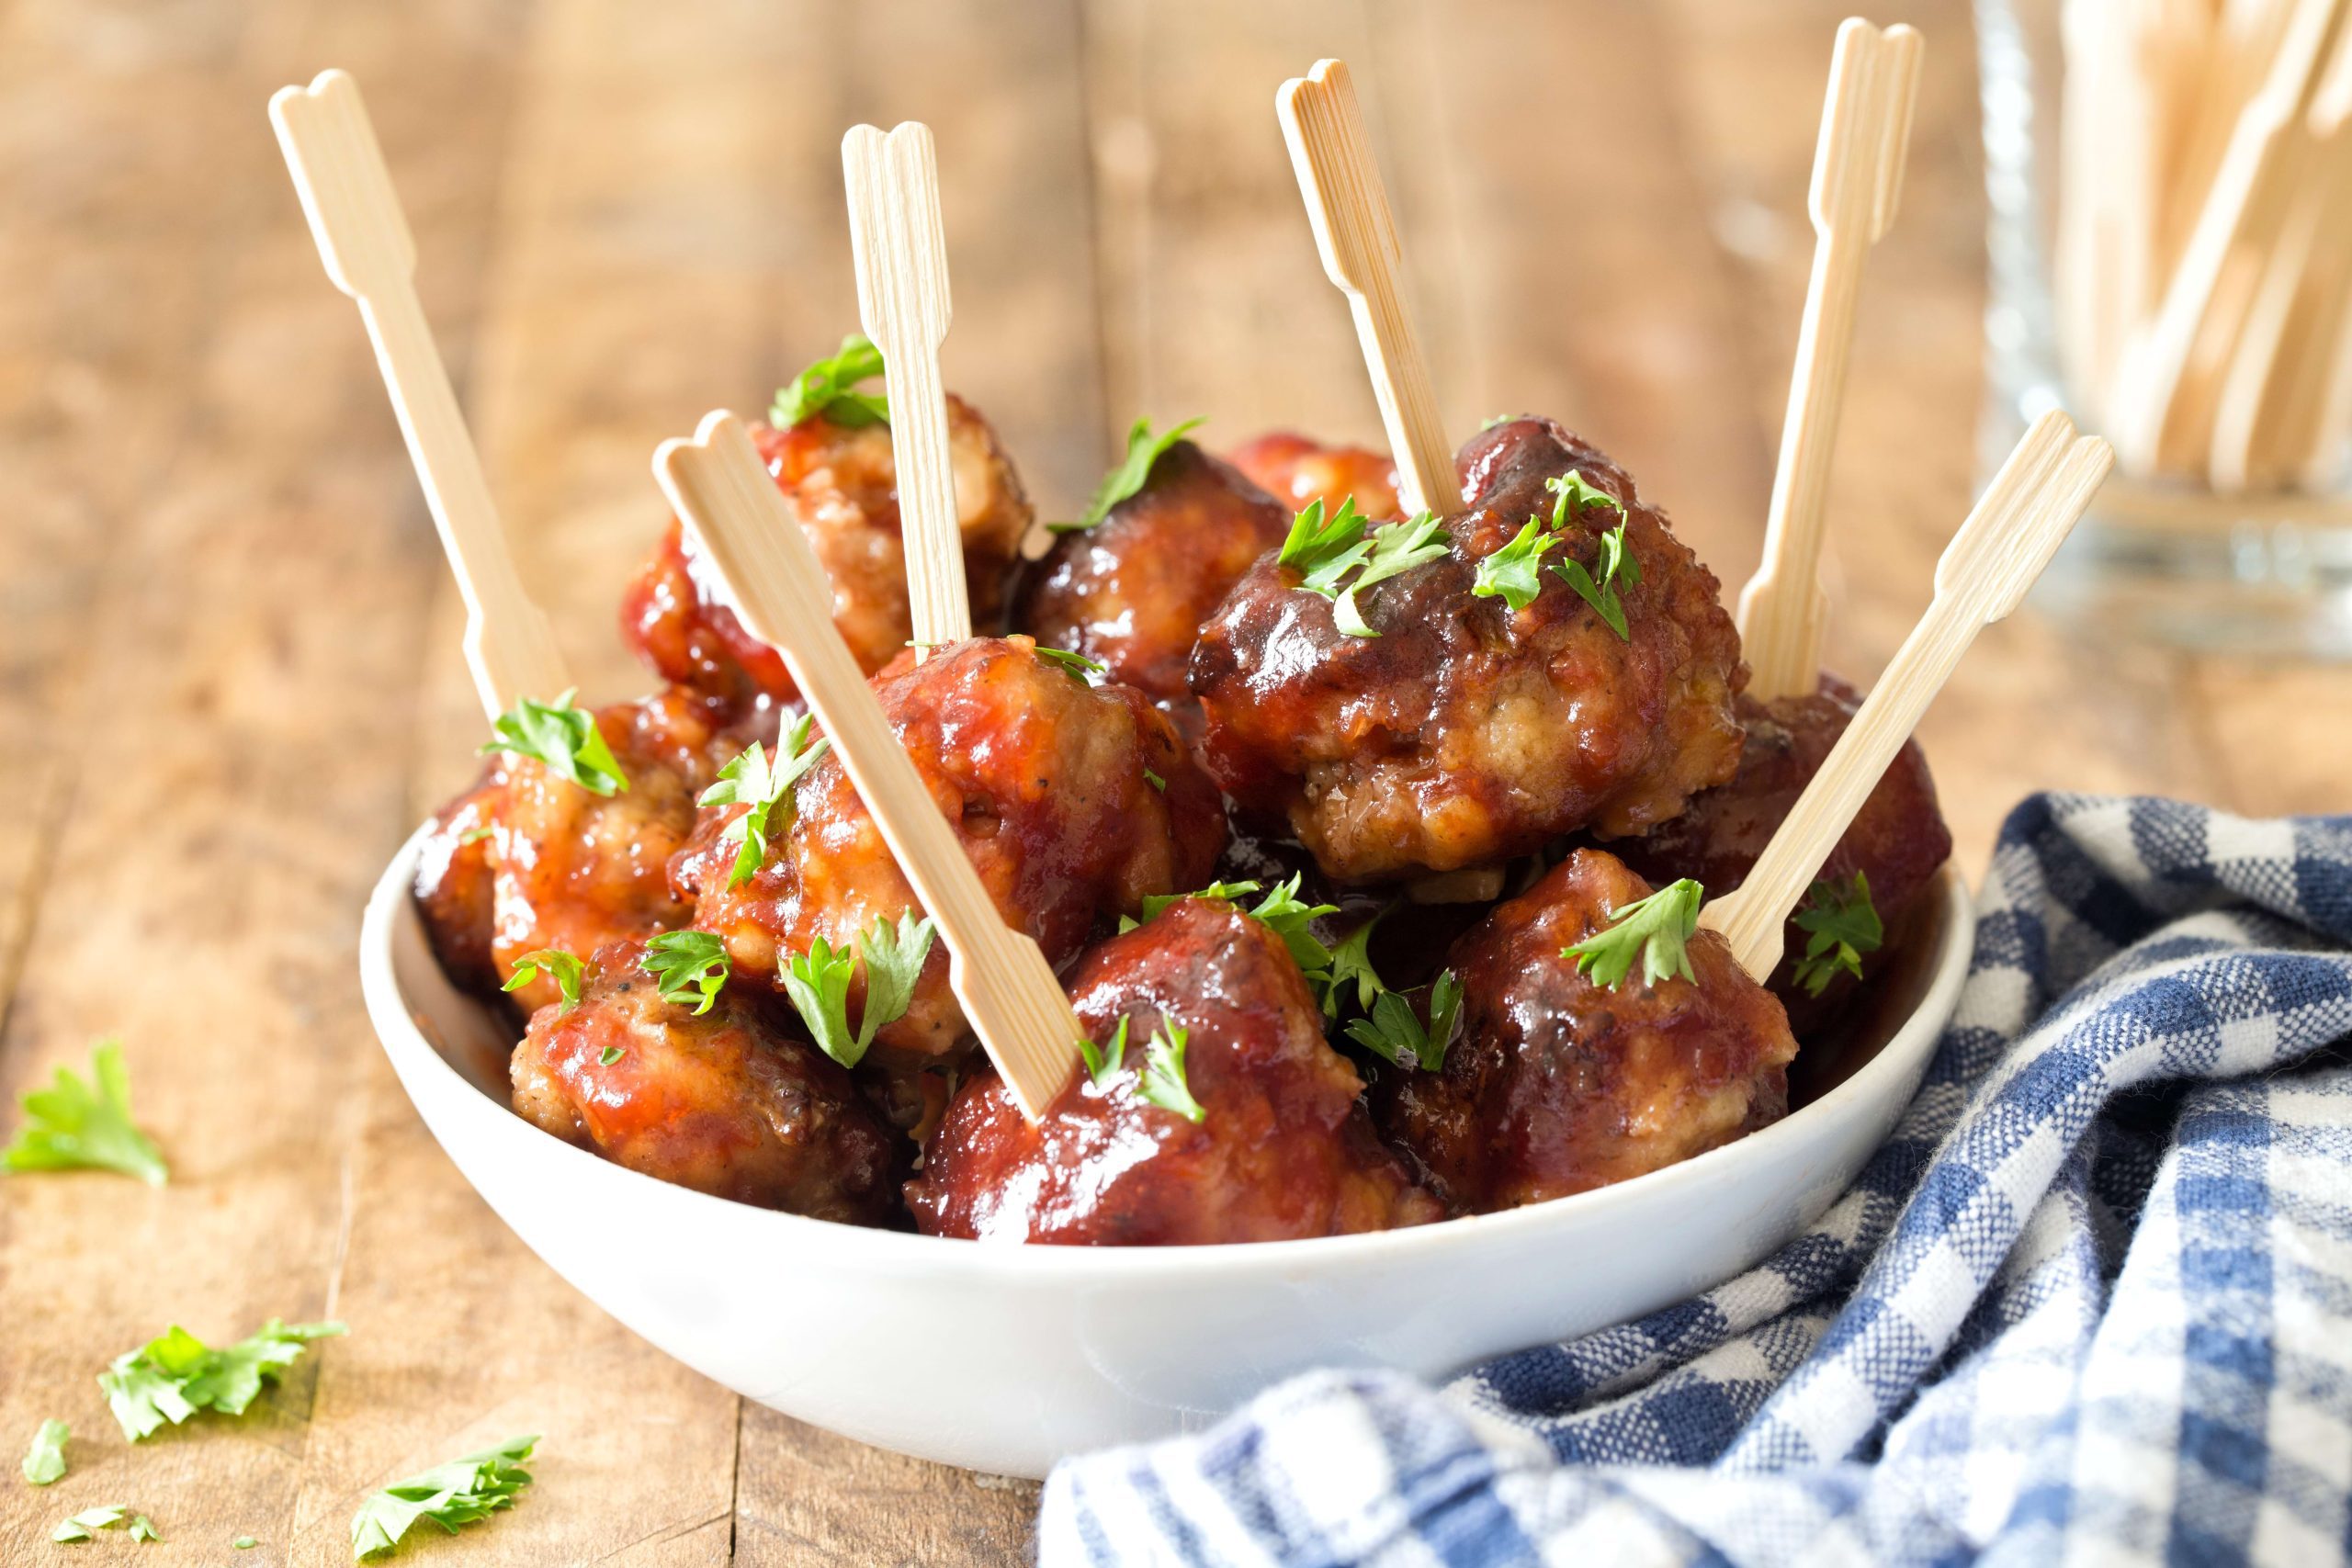 Chili Meatballs in a white bowl with toothpicks to serve as a finger food or serving dish.